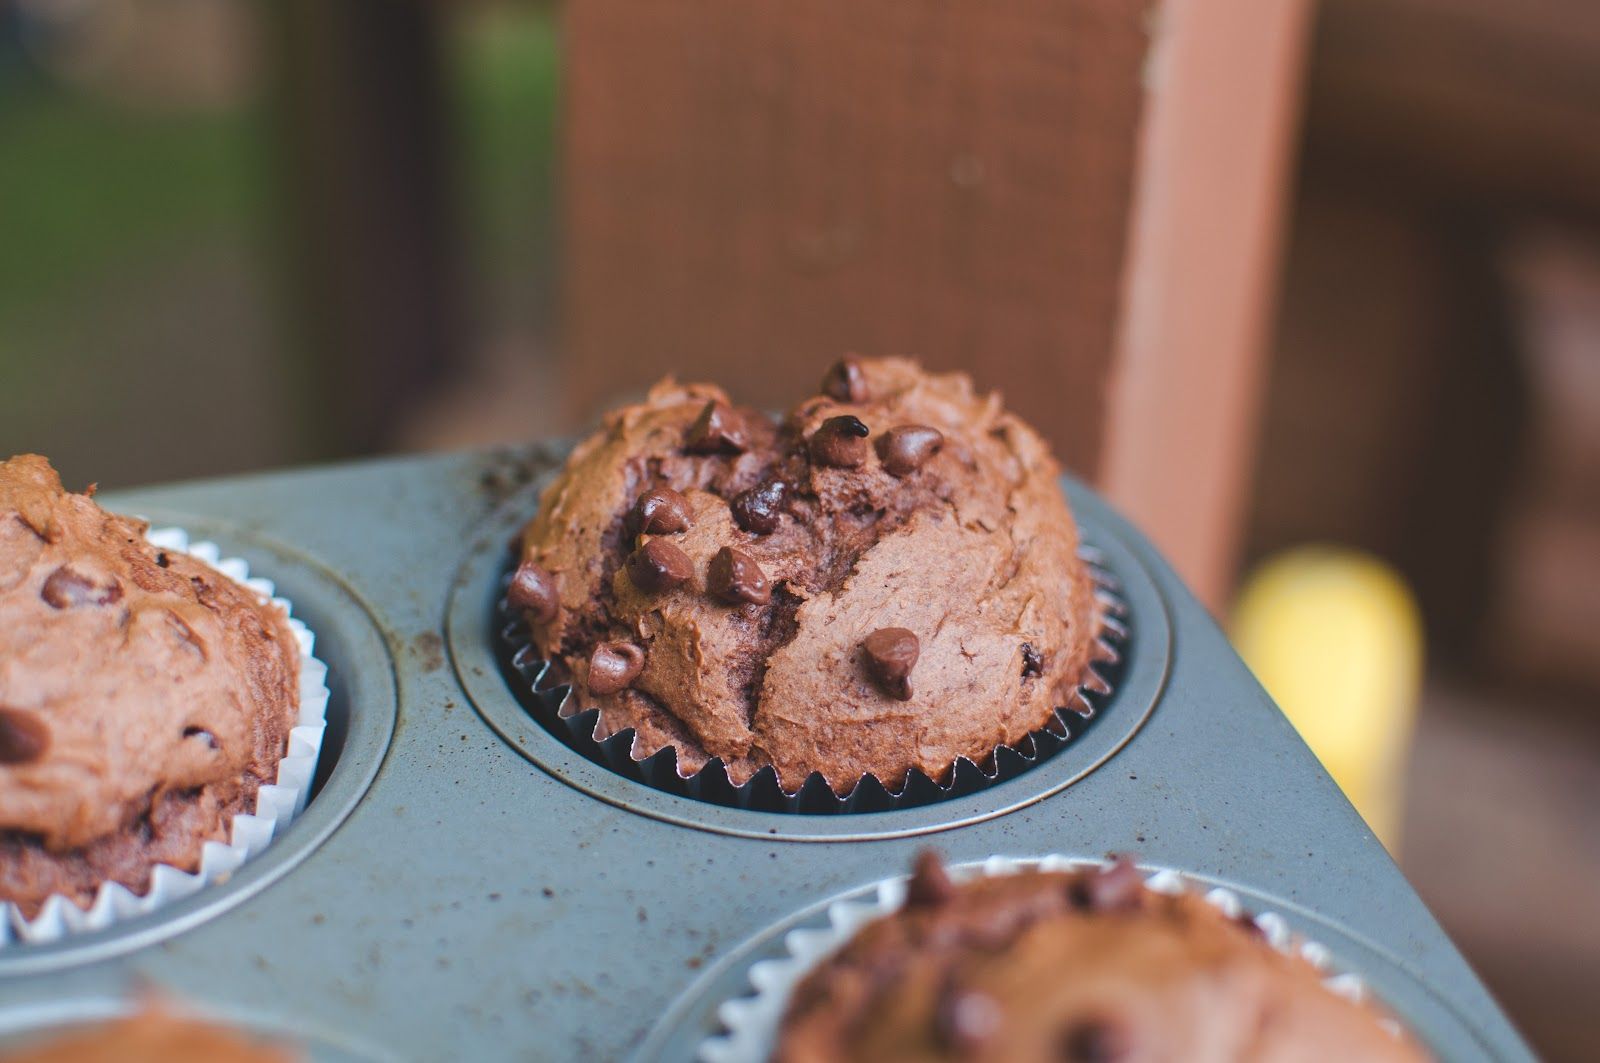 📷 Choose Between Normal or Pinterest Foods and We’ll Reveal If You Have a Male or Female Brain Double chocolate muffins